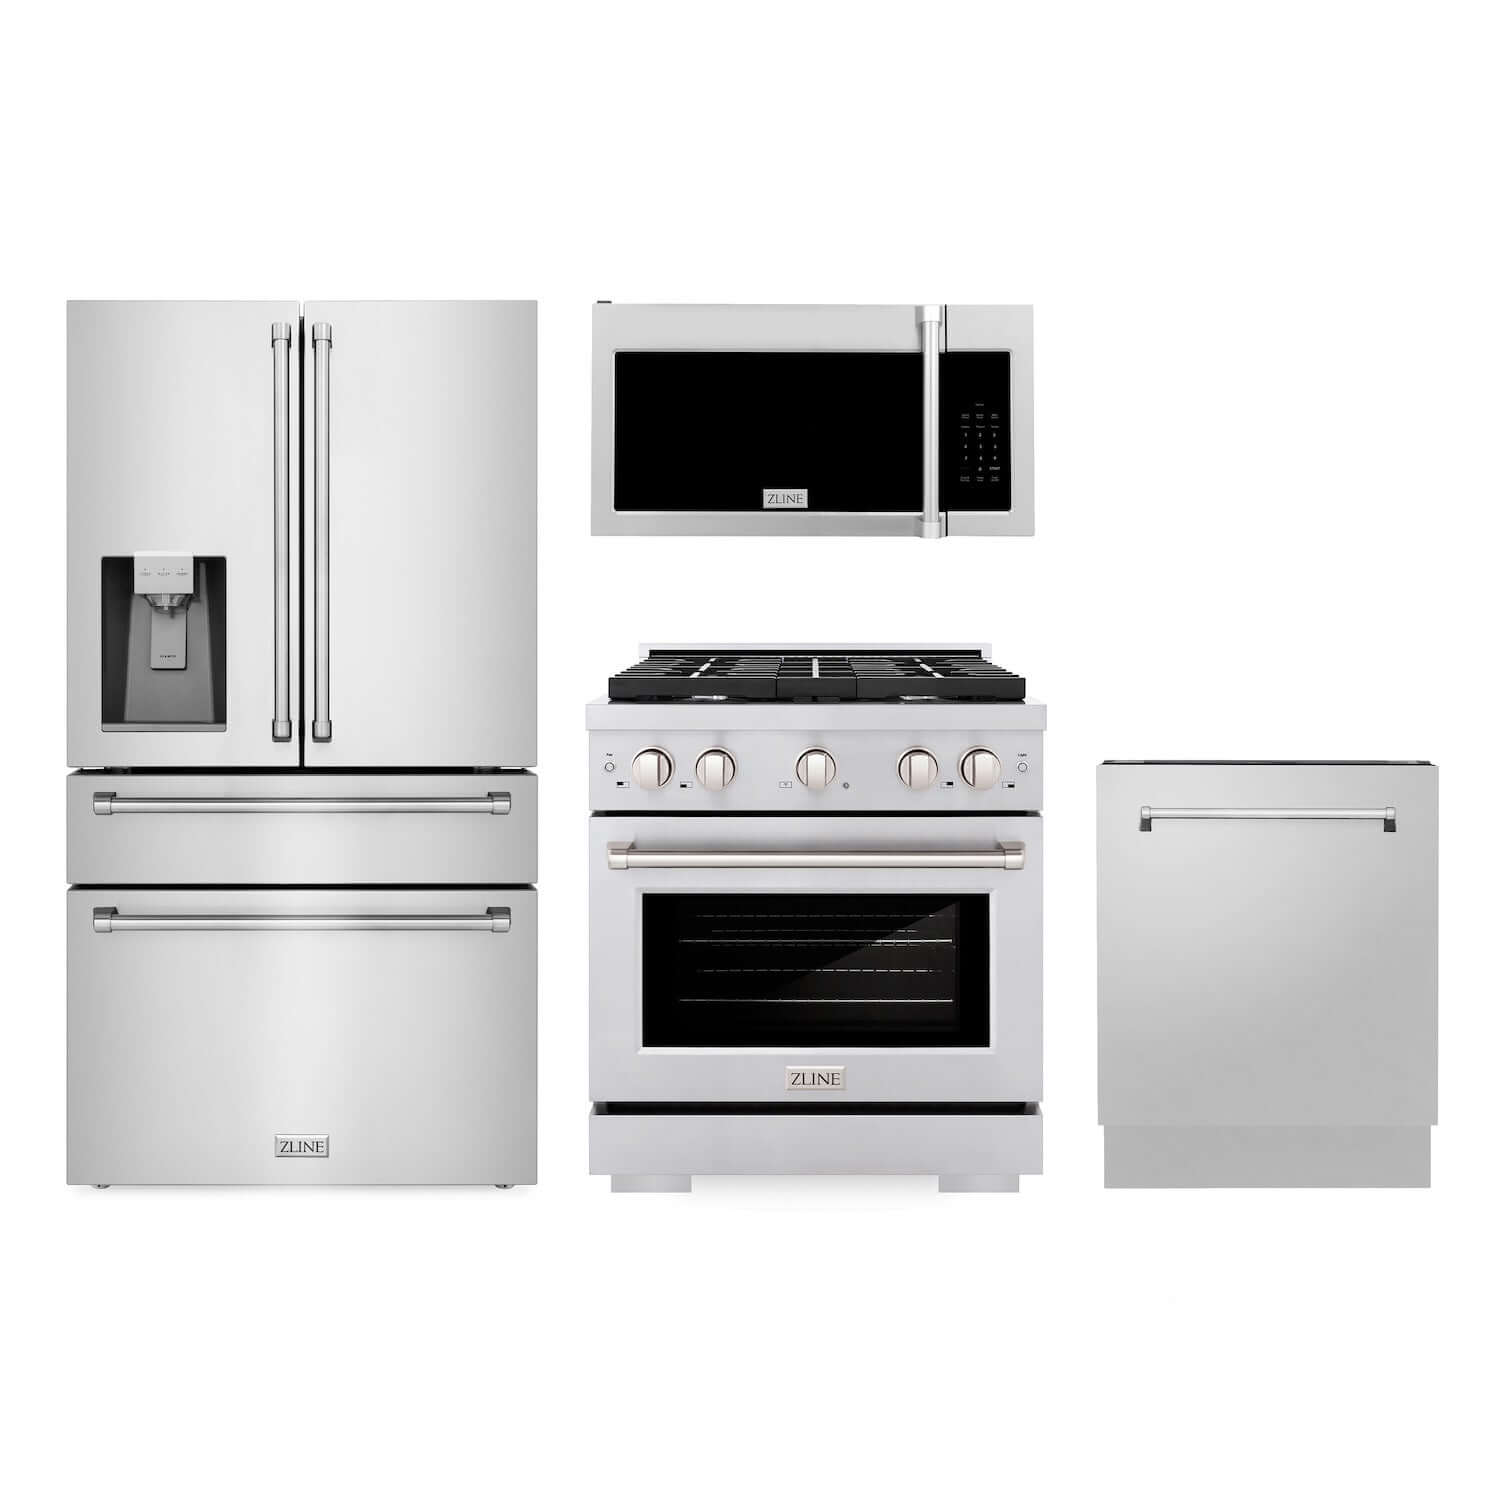 ZLINE Stainless Steel Kitchen Package with 36 in. French Door Refrigerator, 30 in. Gas Range, 30 in. Over-the-Range Microwave Oven, and 24 in. Tall Tub Dishwasher